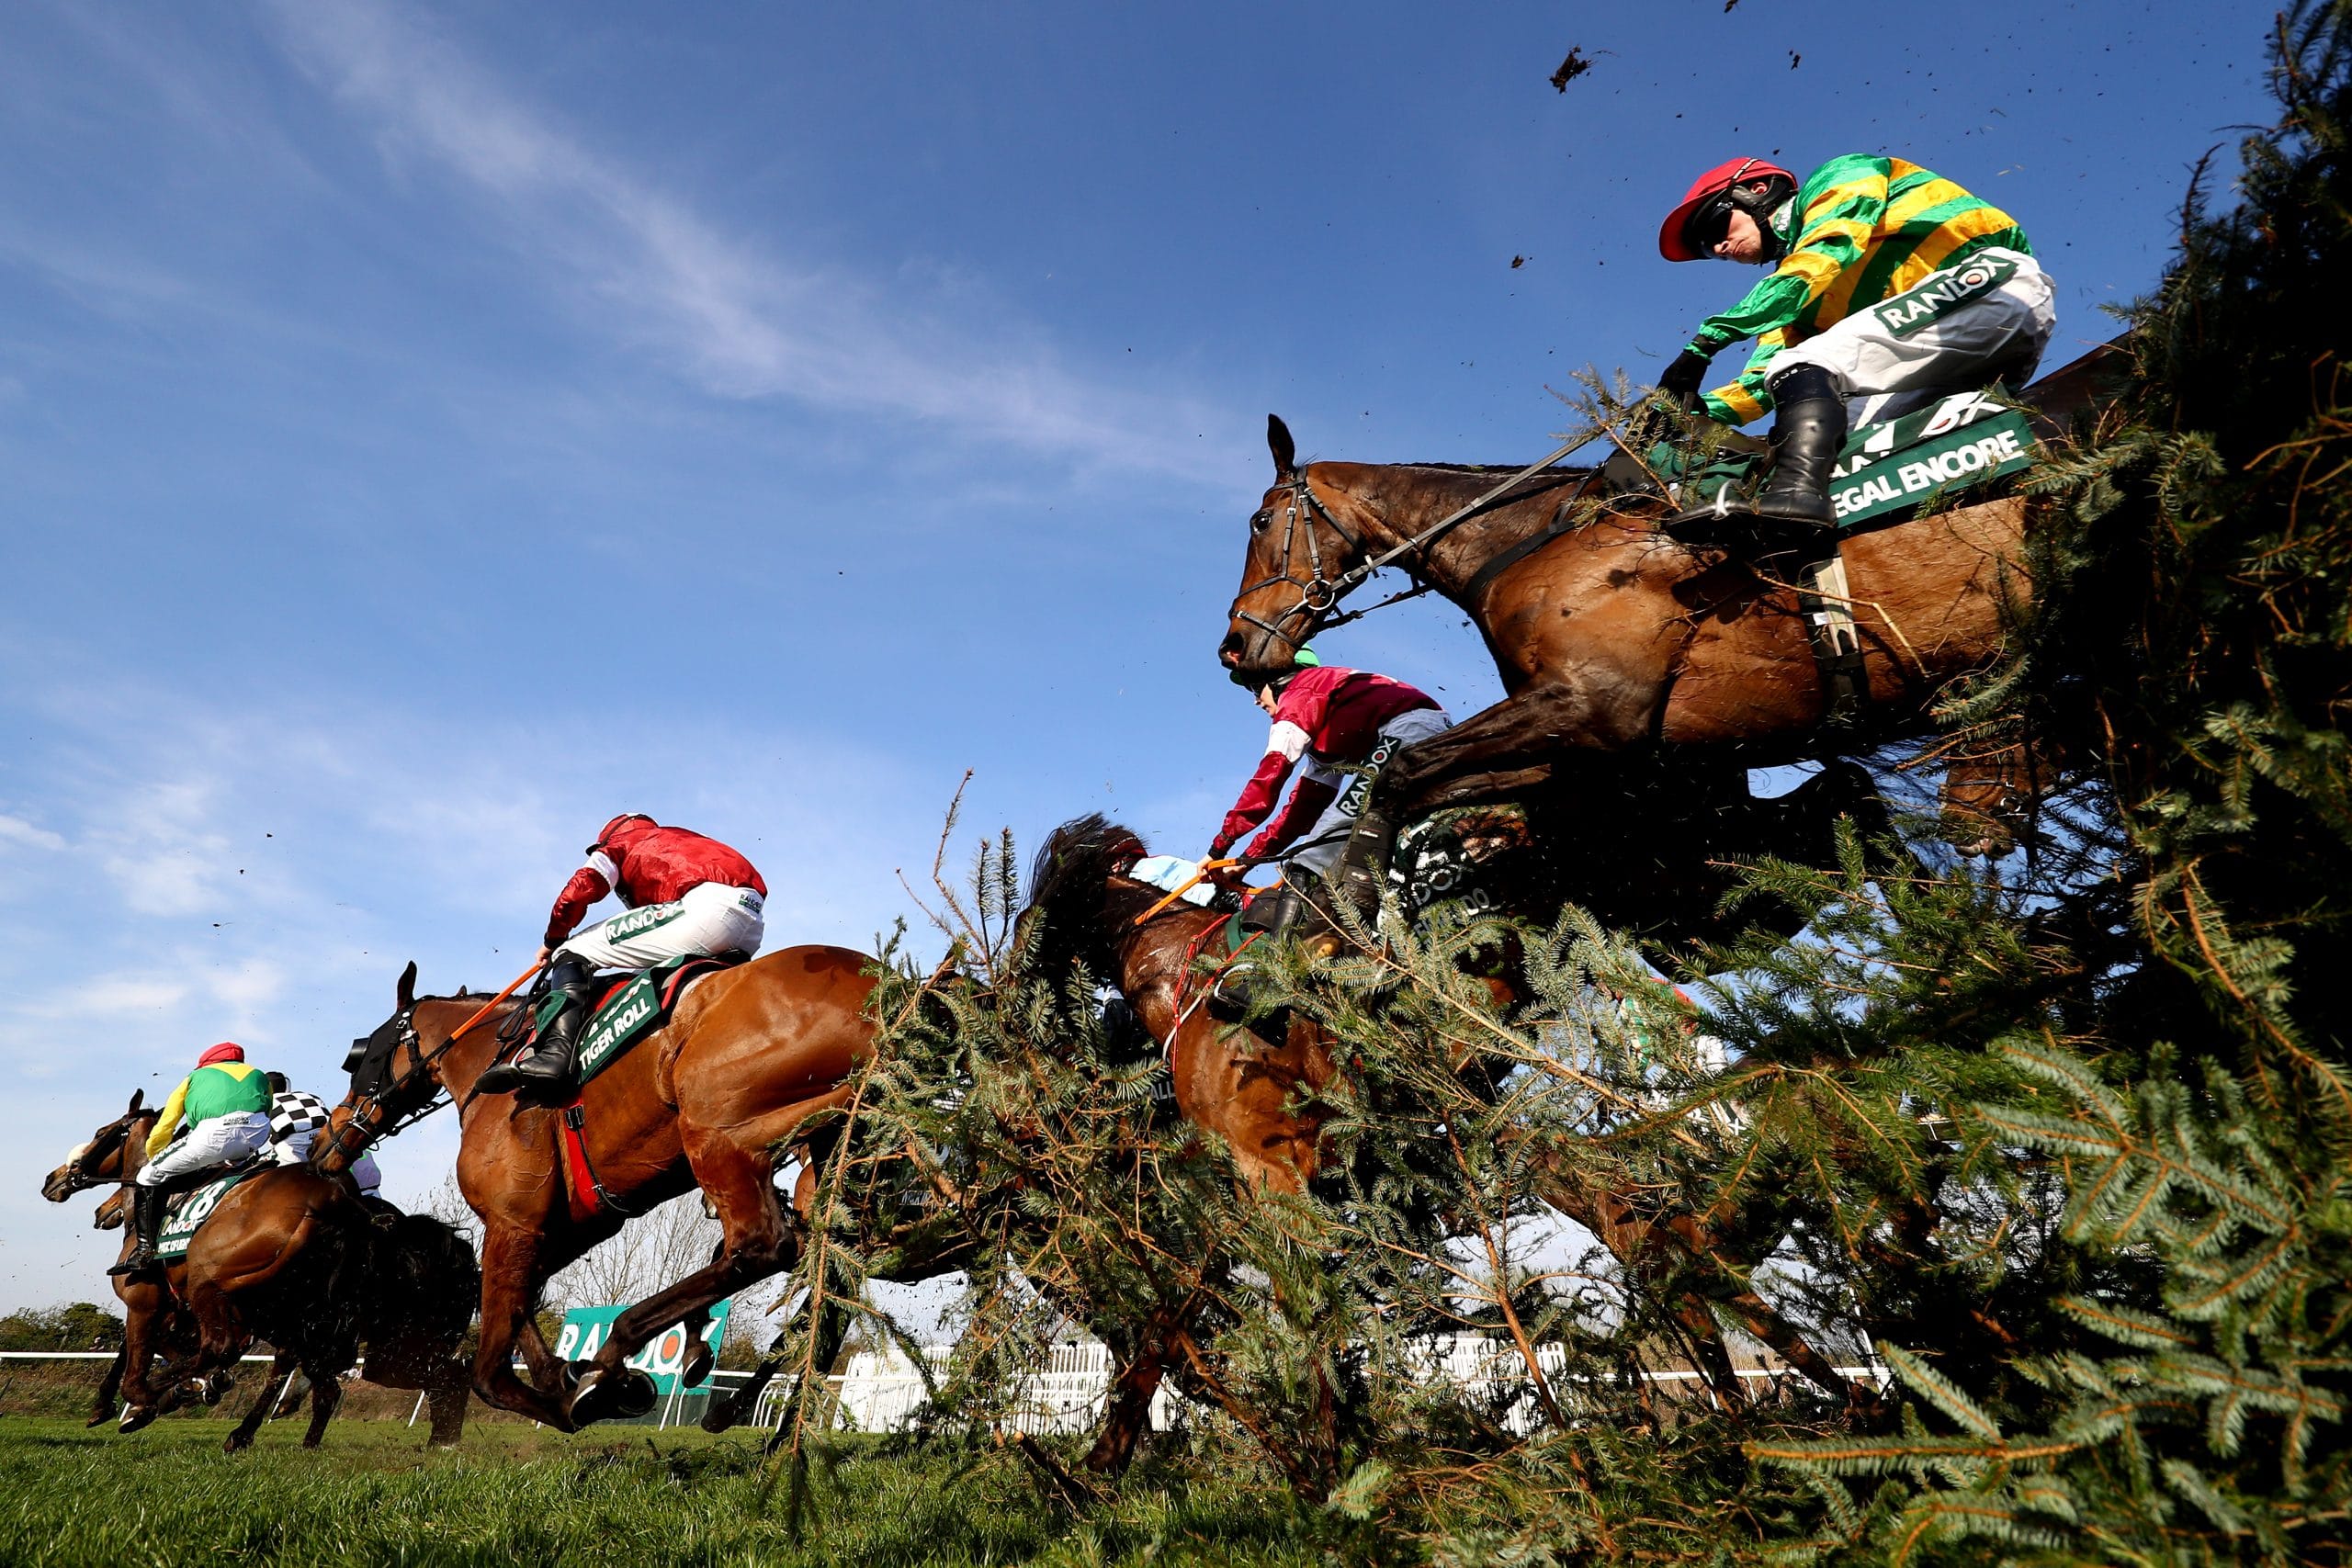 Grand National 2021 | Live™️ Stream | Watch Online Game 2021 HD TV Channel